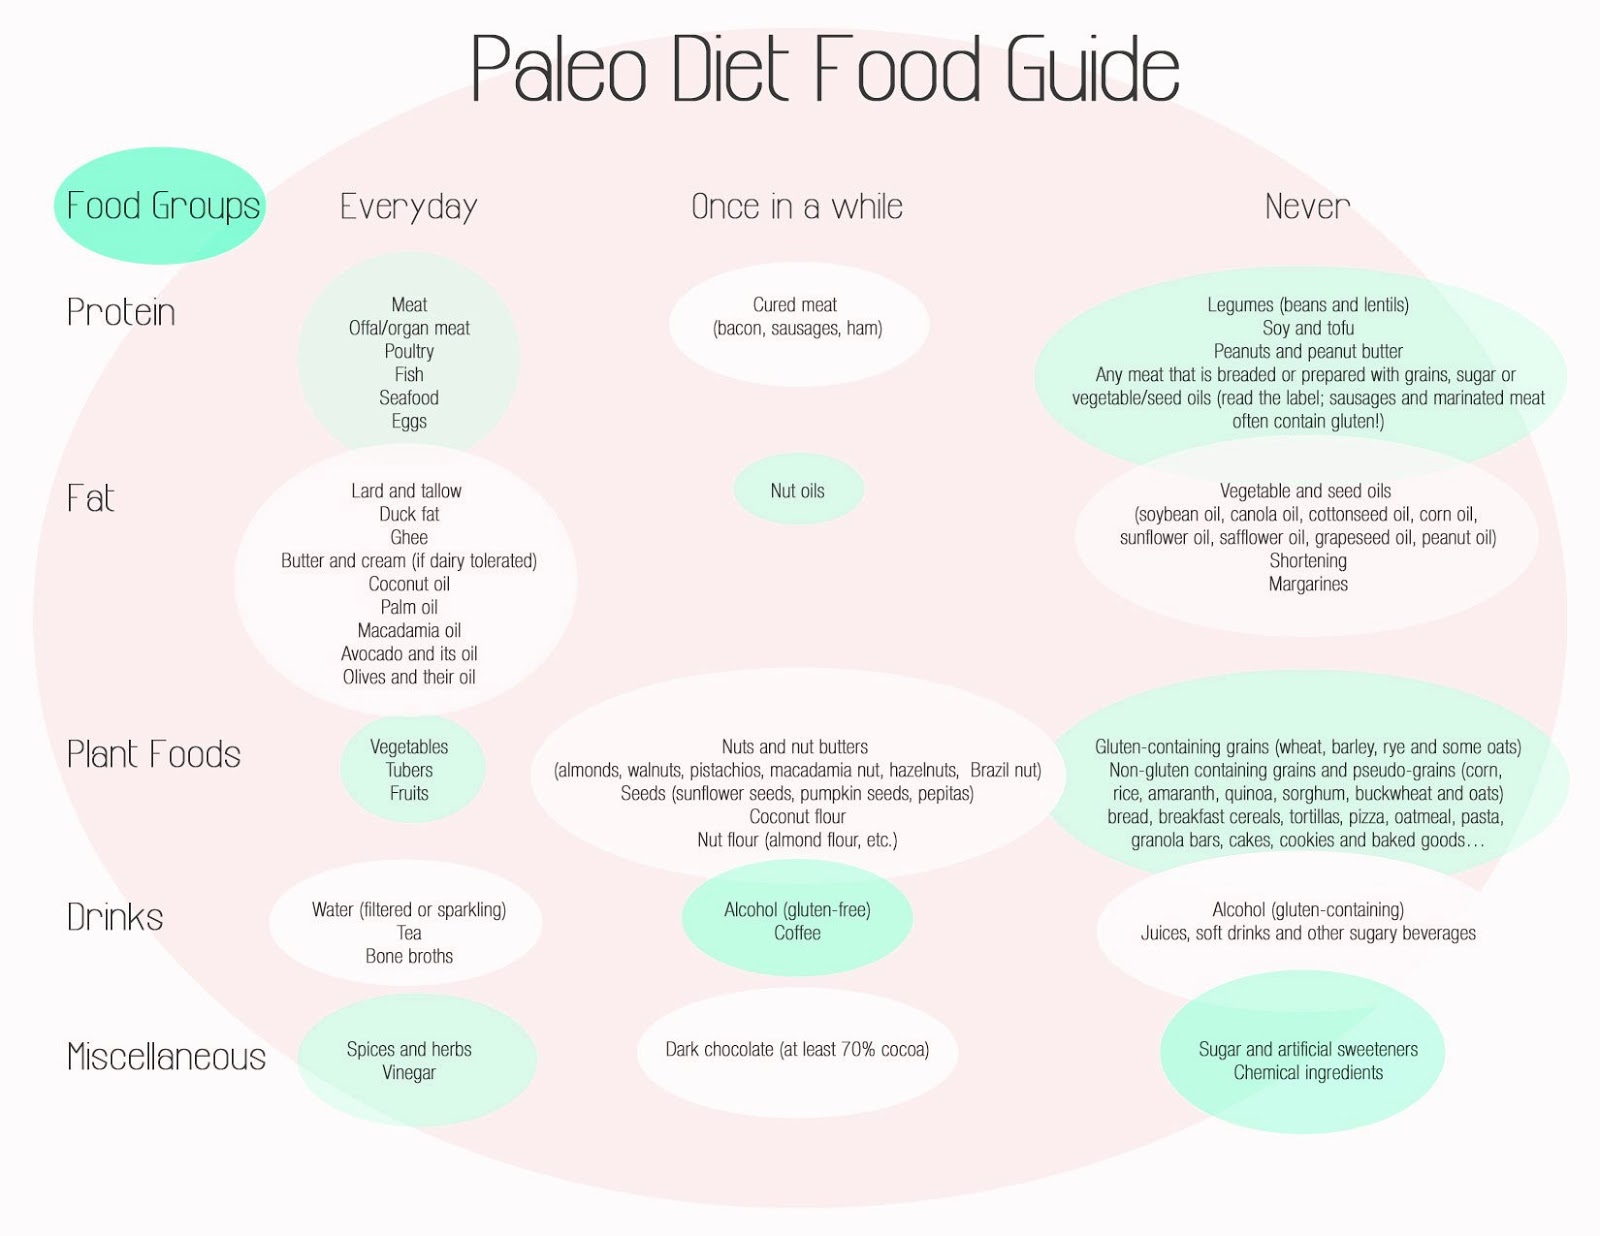 ... bulk of the carbohydrate intake on paleo diet food. The preferred